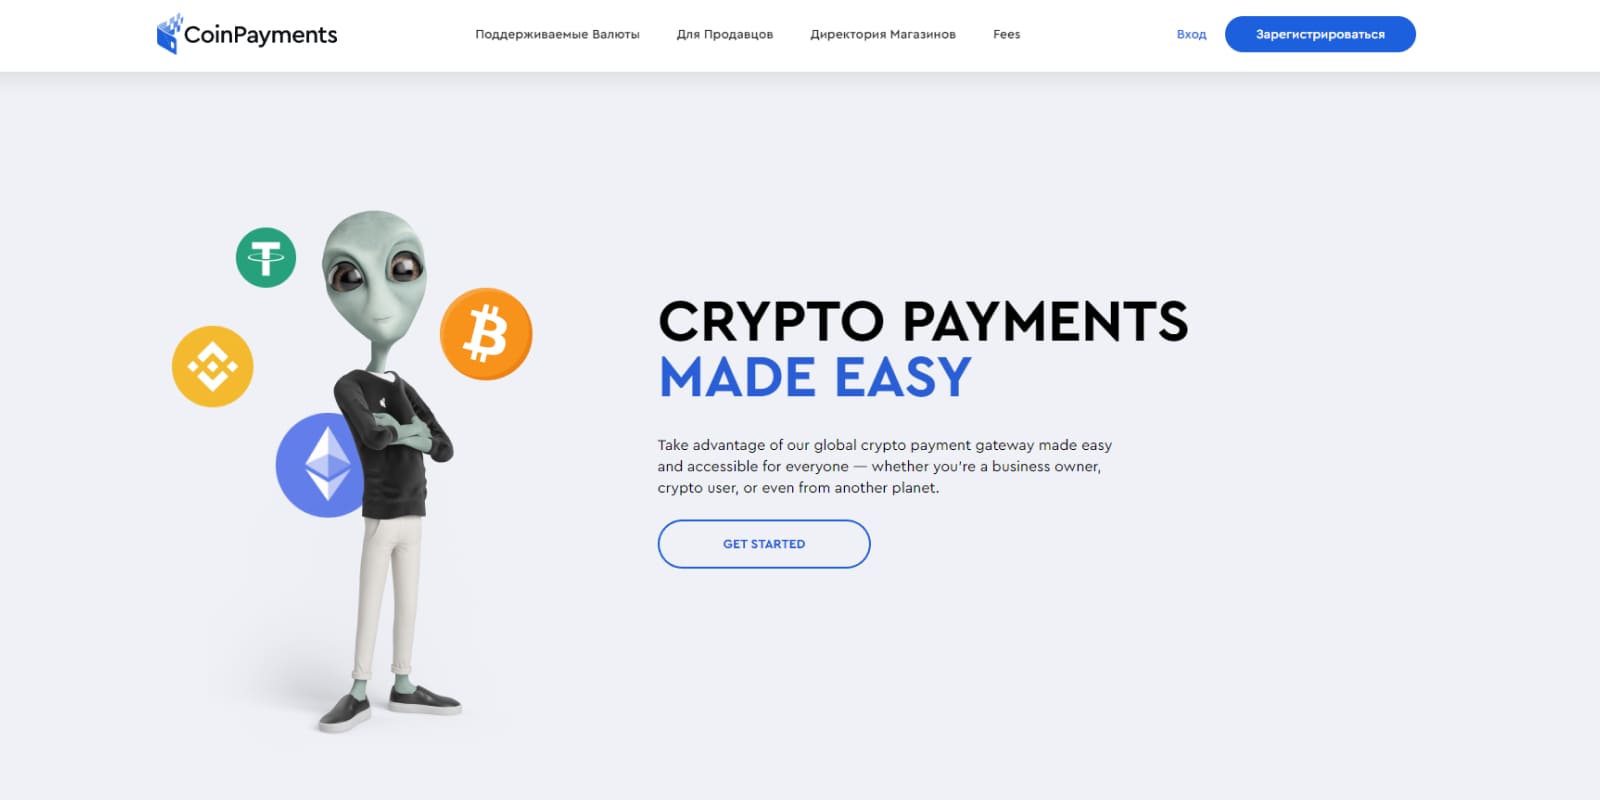 CoinPayments is a crypto gateway and wallet for 170+ coins, offering automatic payments to your wallet.